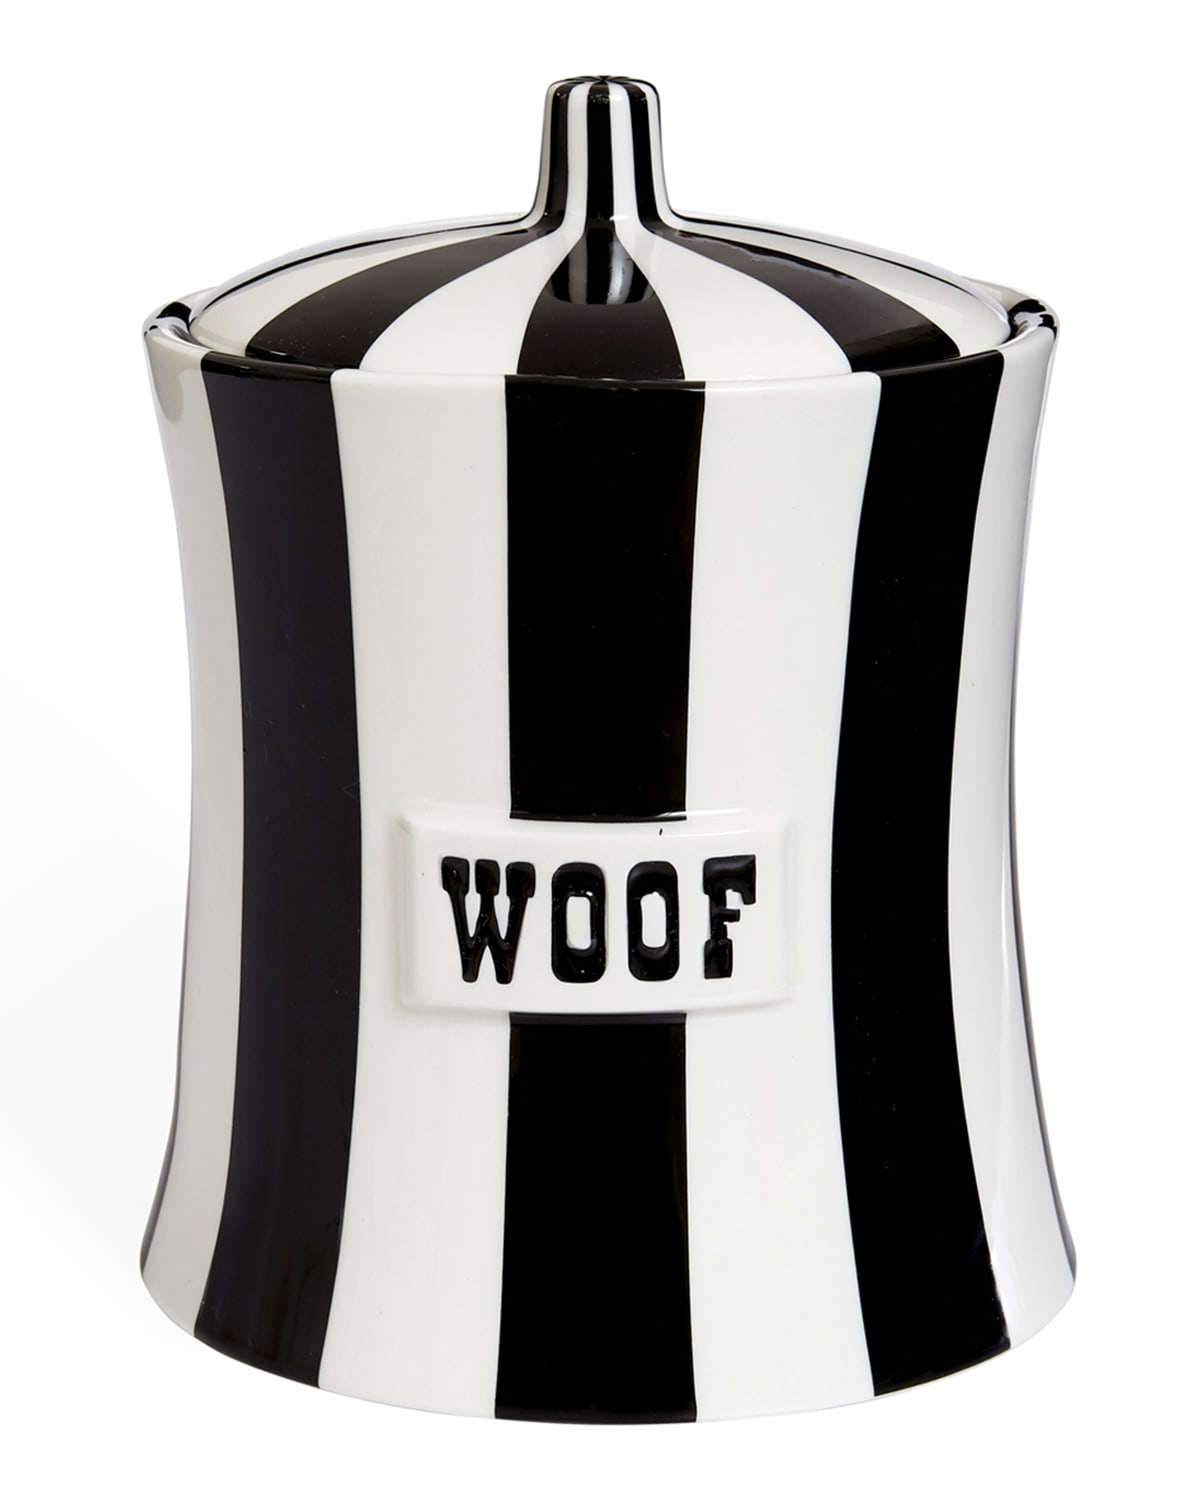 Jonathan Adler Vice Woof Canister In Black